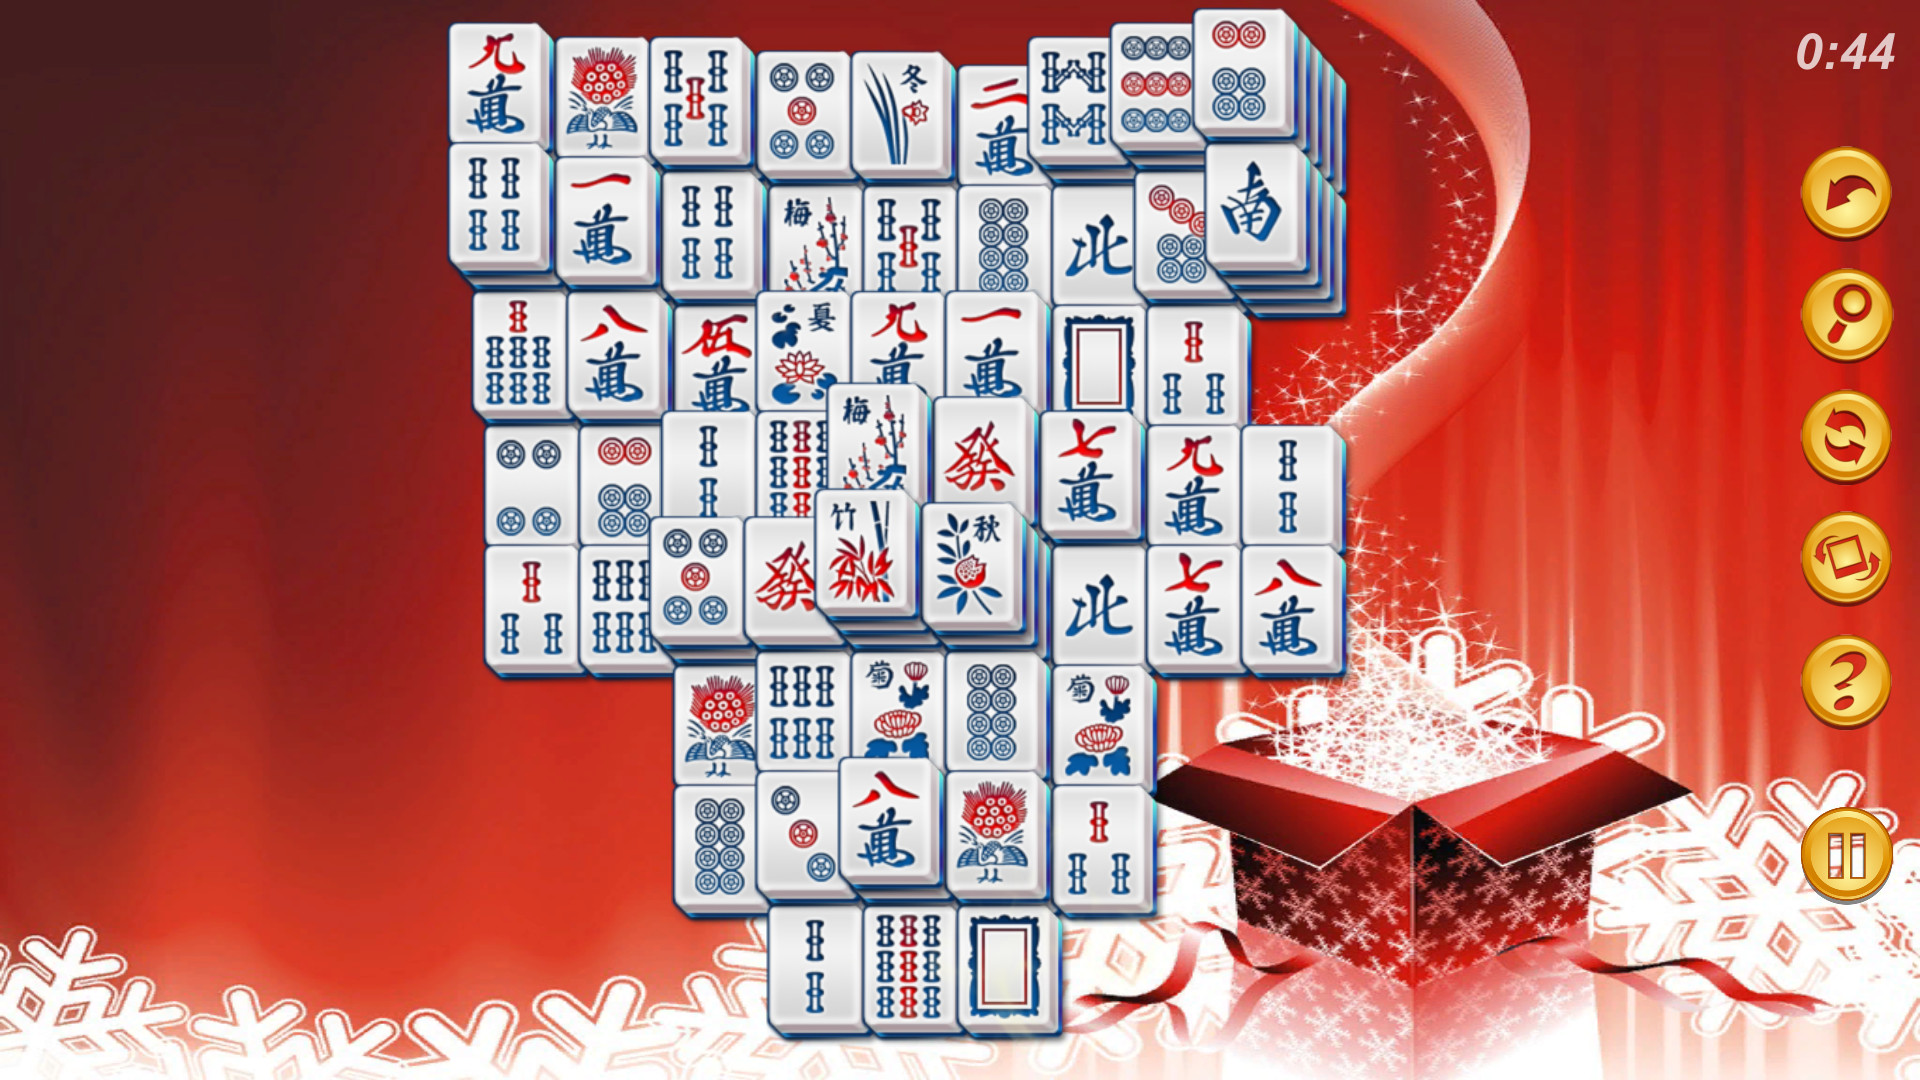 Mahjong Deluxe Plus - Free Play & No Download